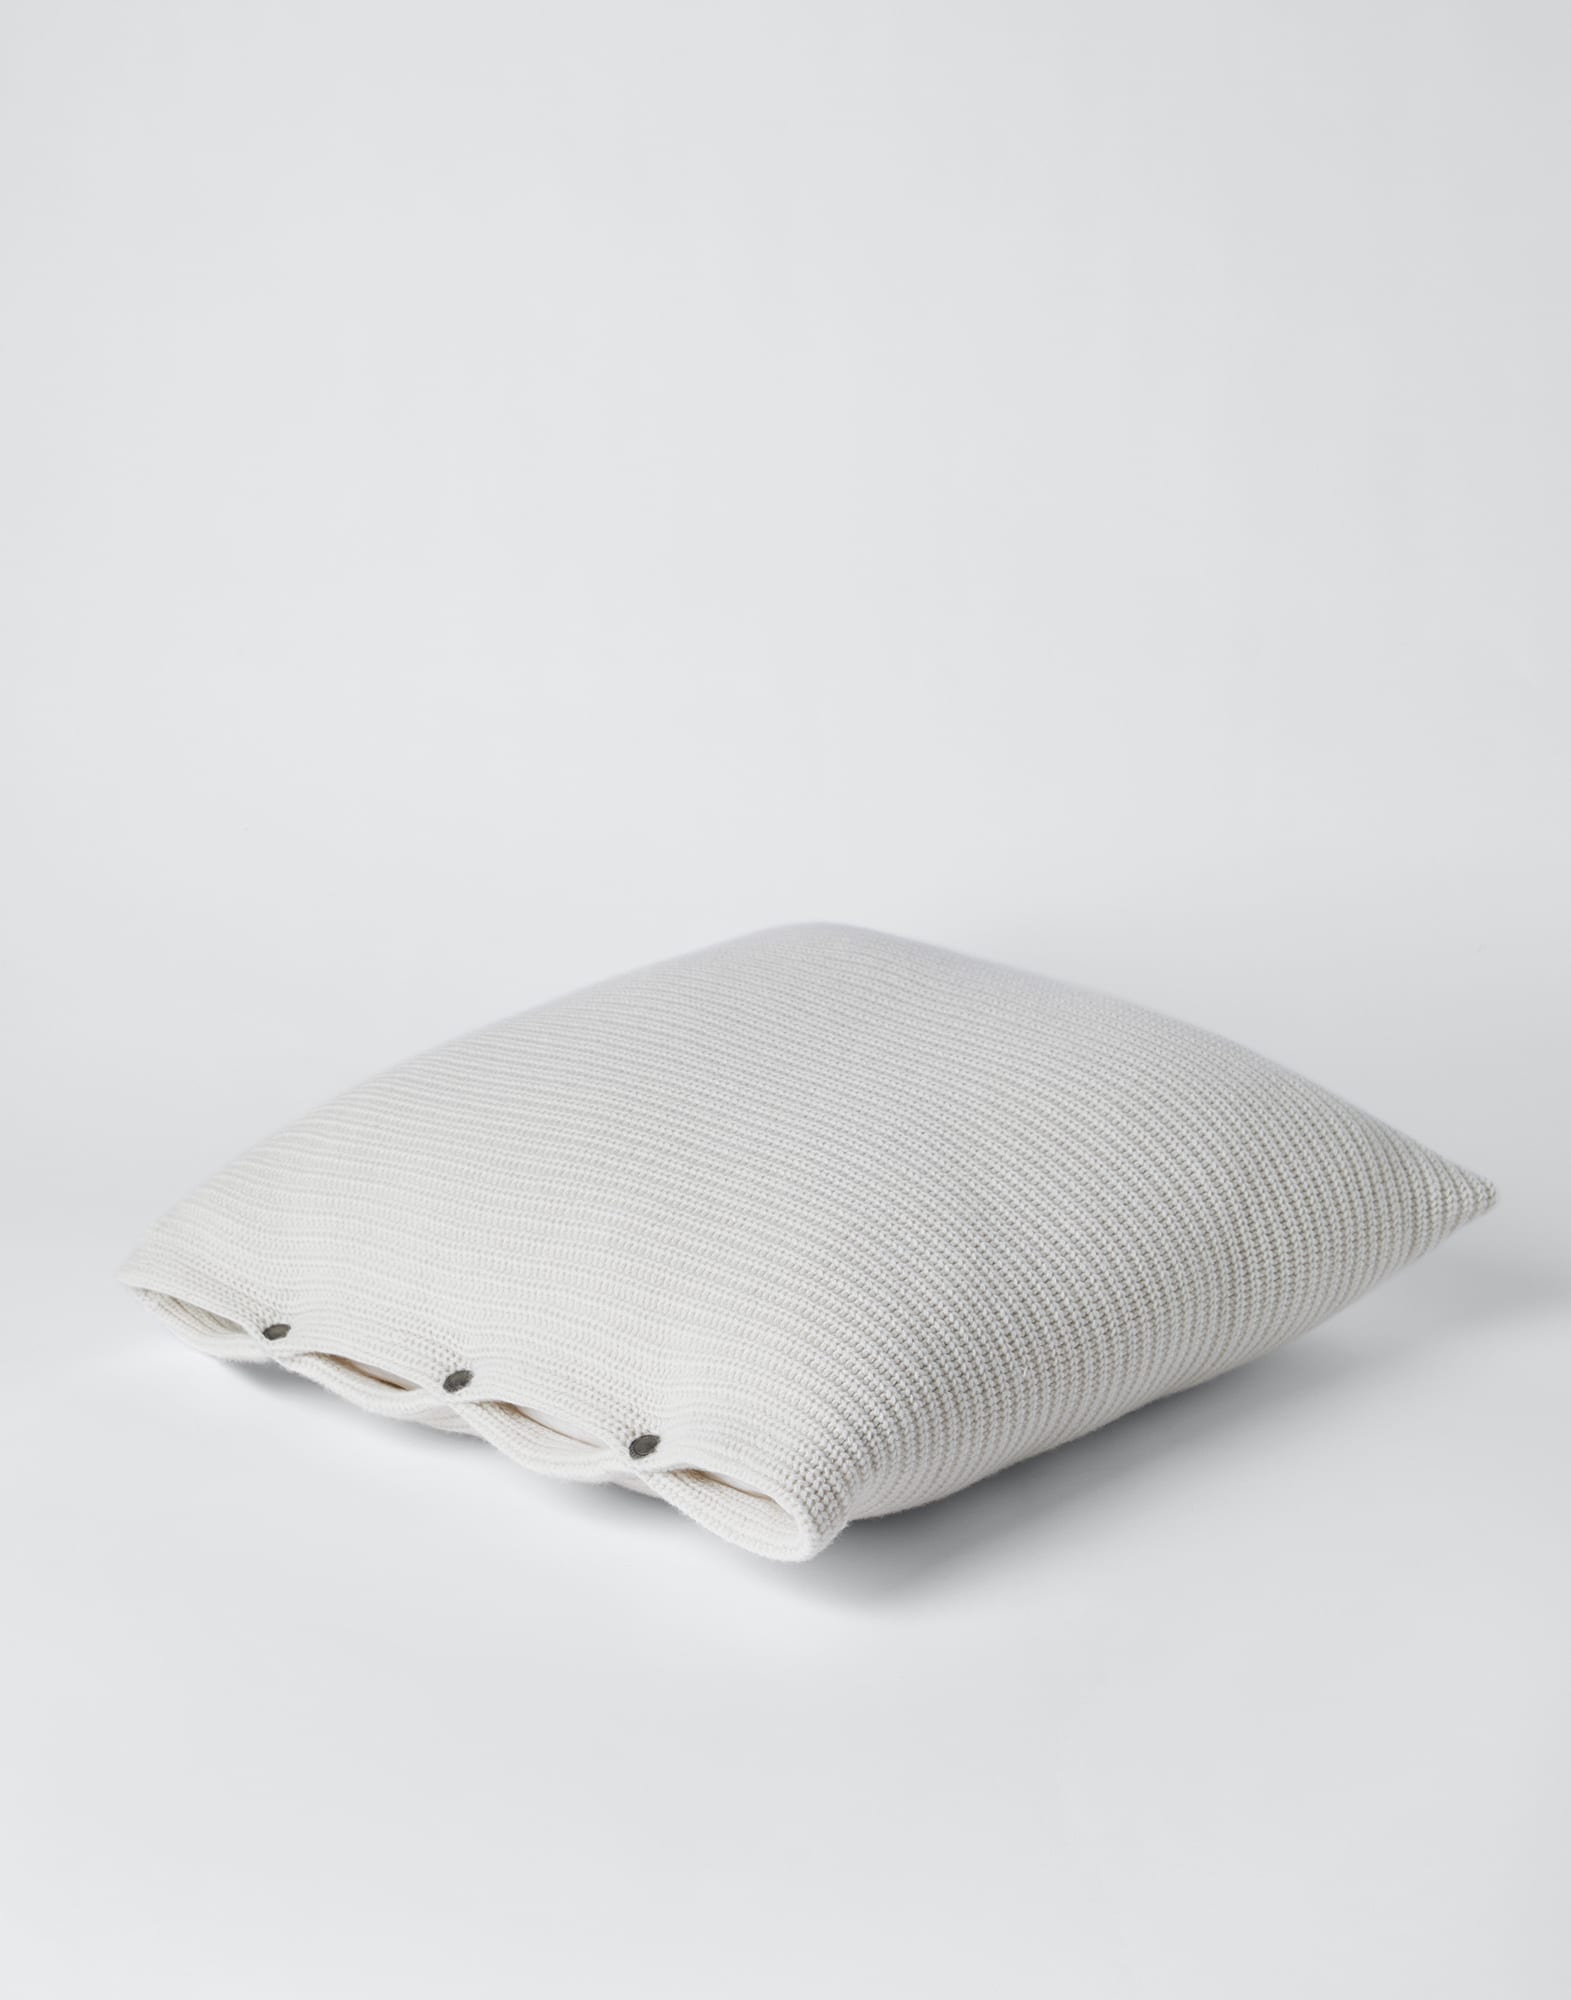 Cushion with cashmere cover